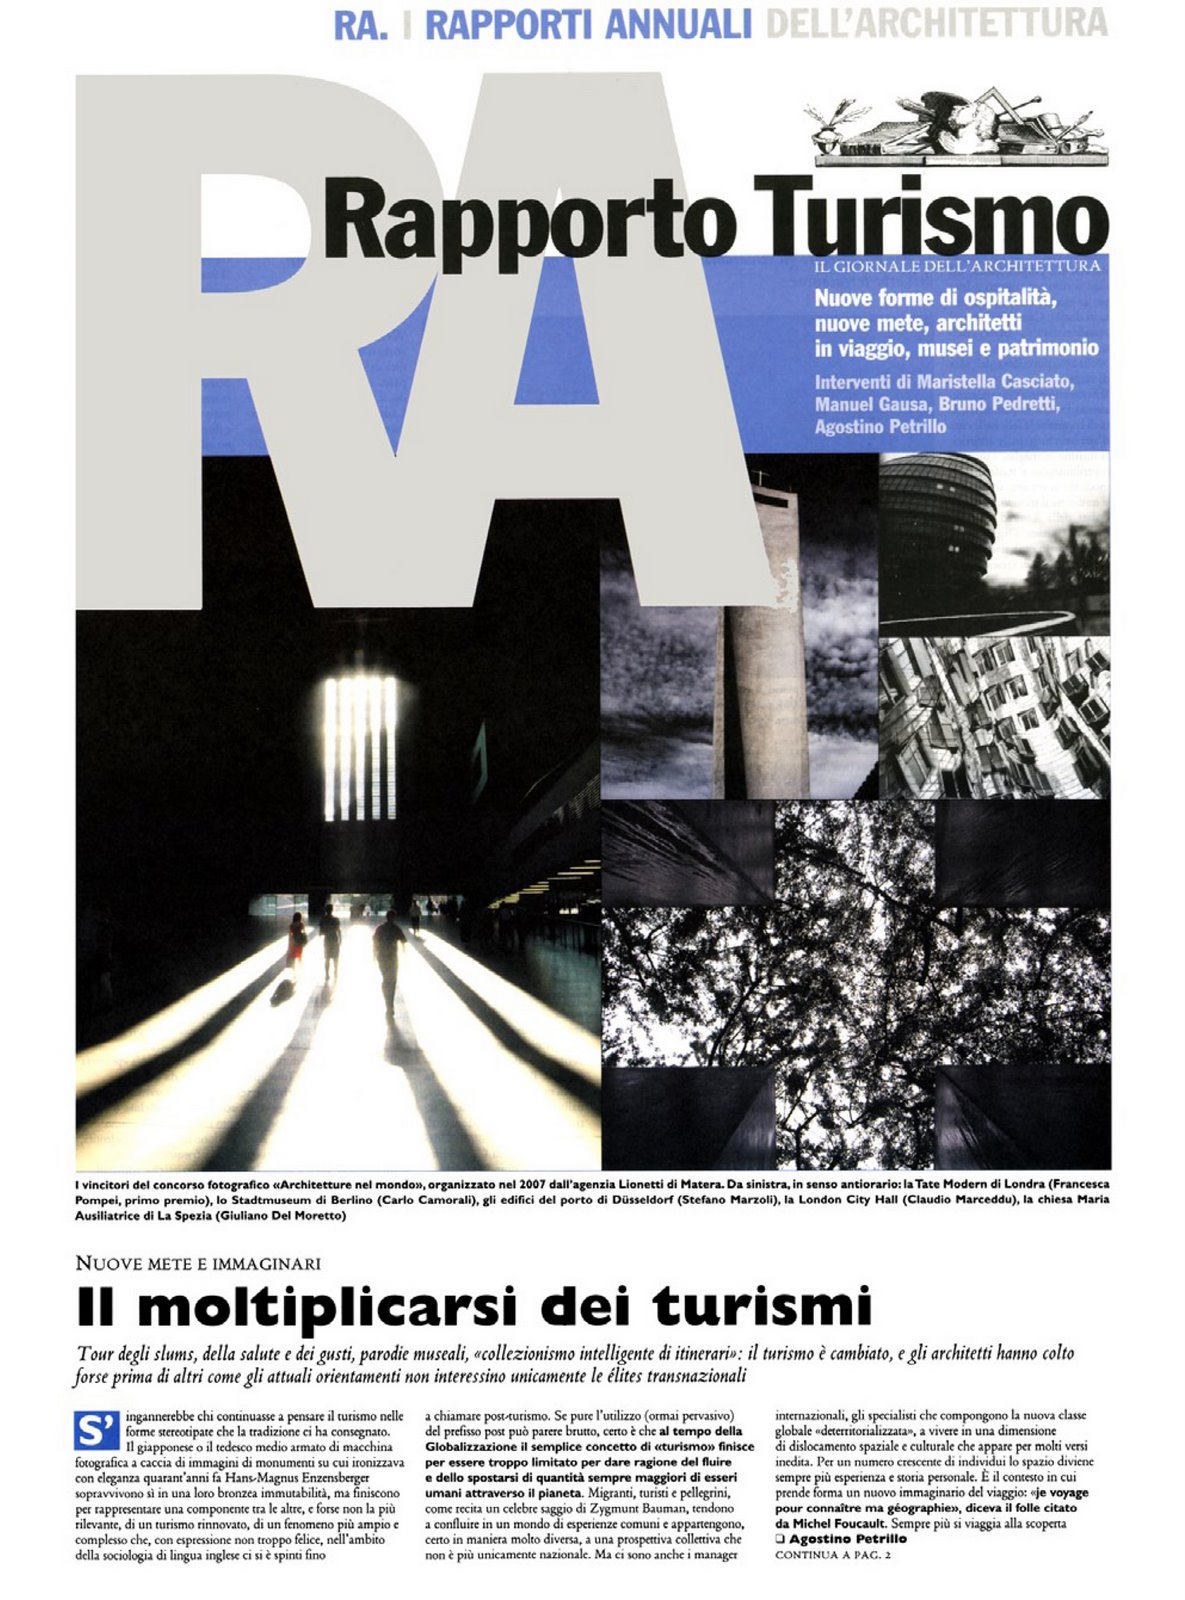 [giornale_archit_62-1.jpg]